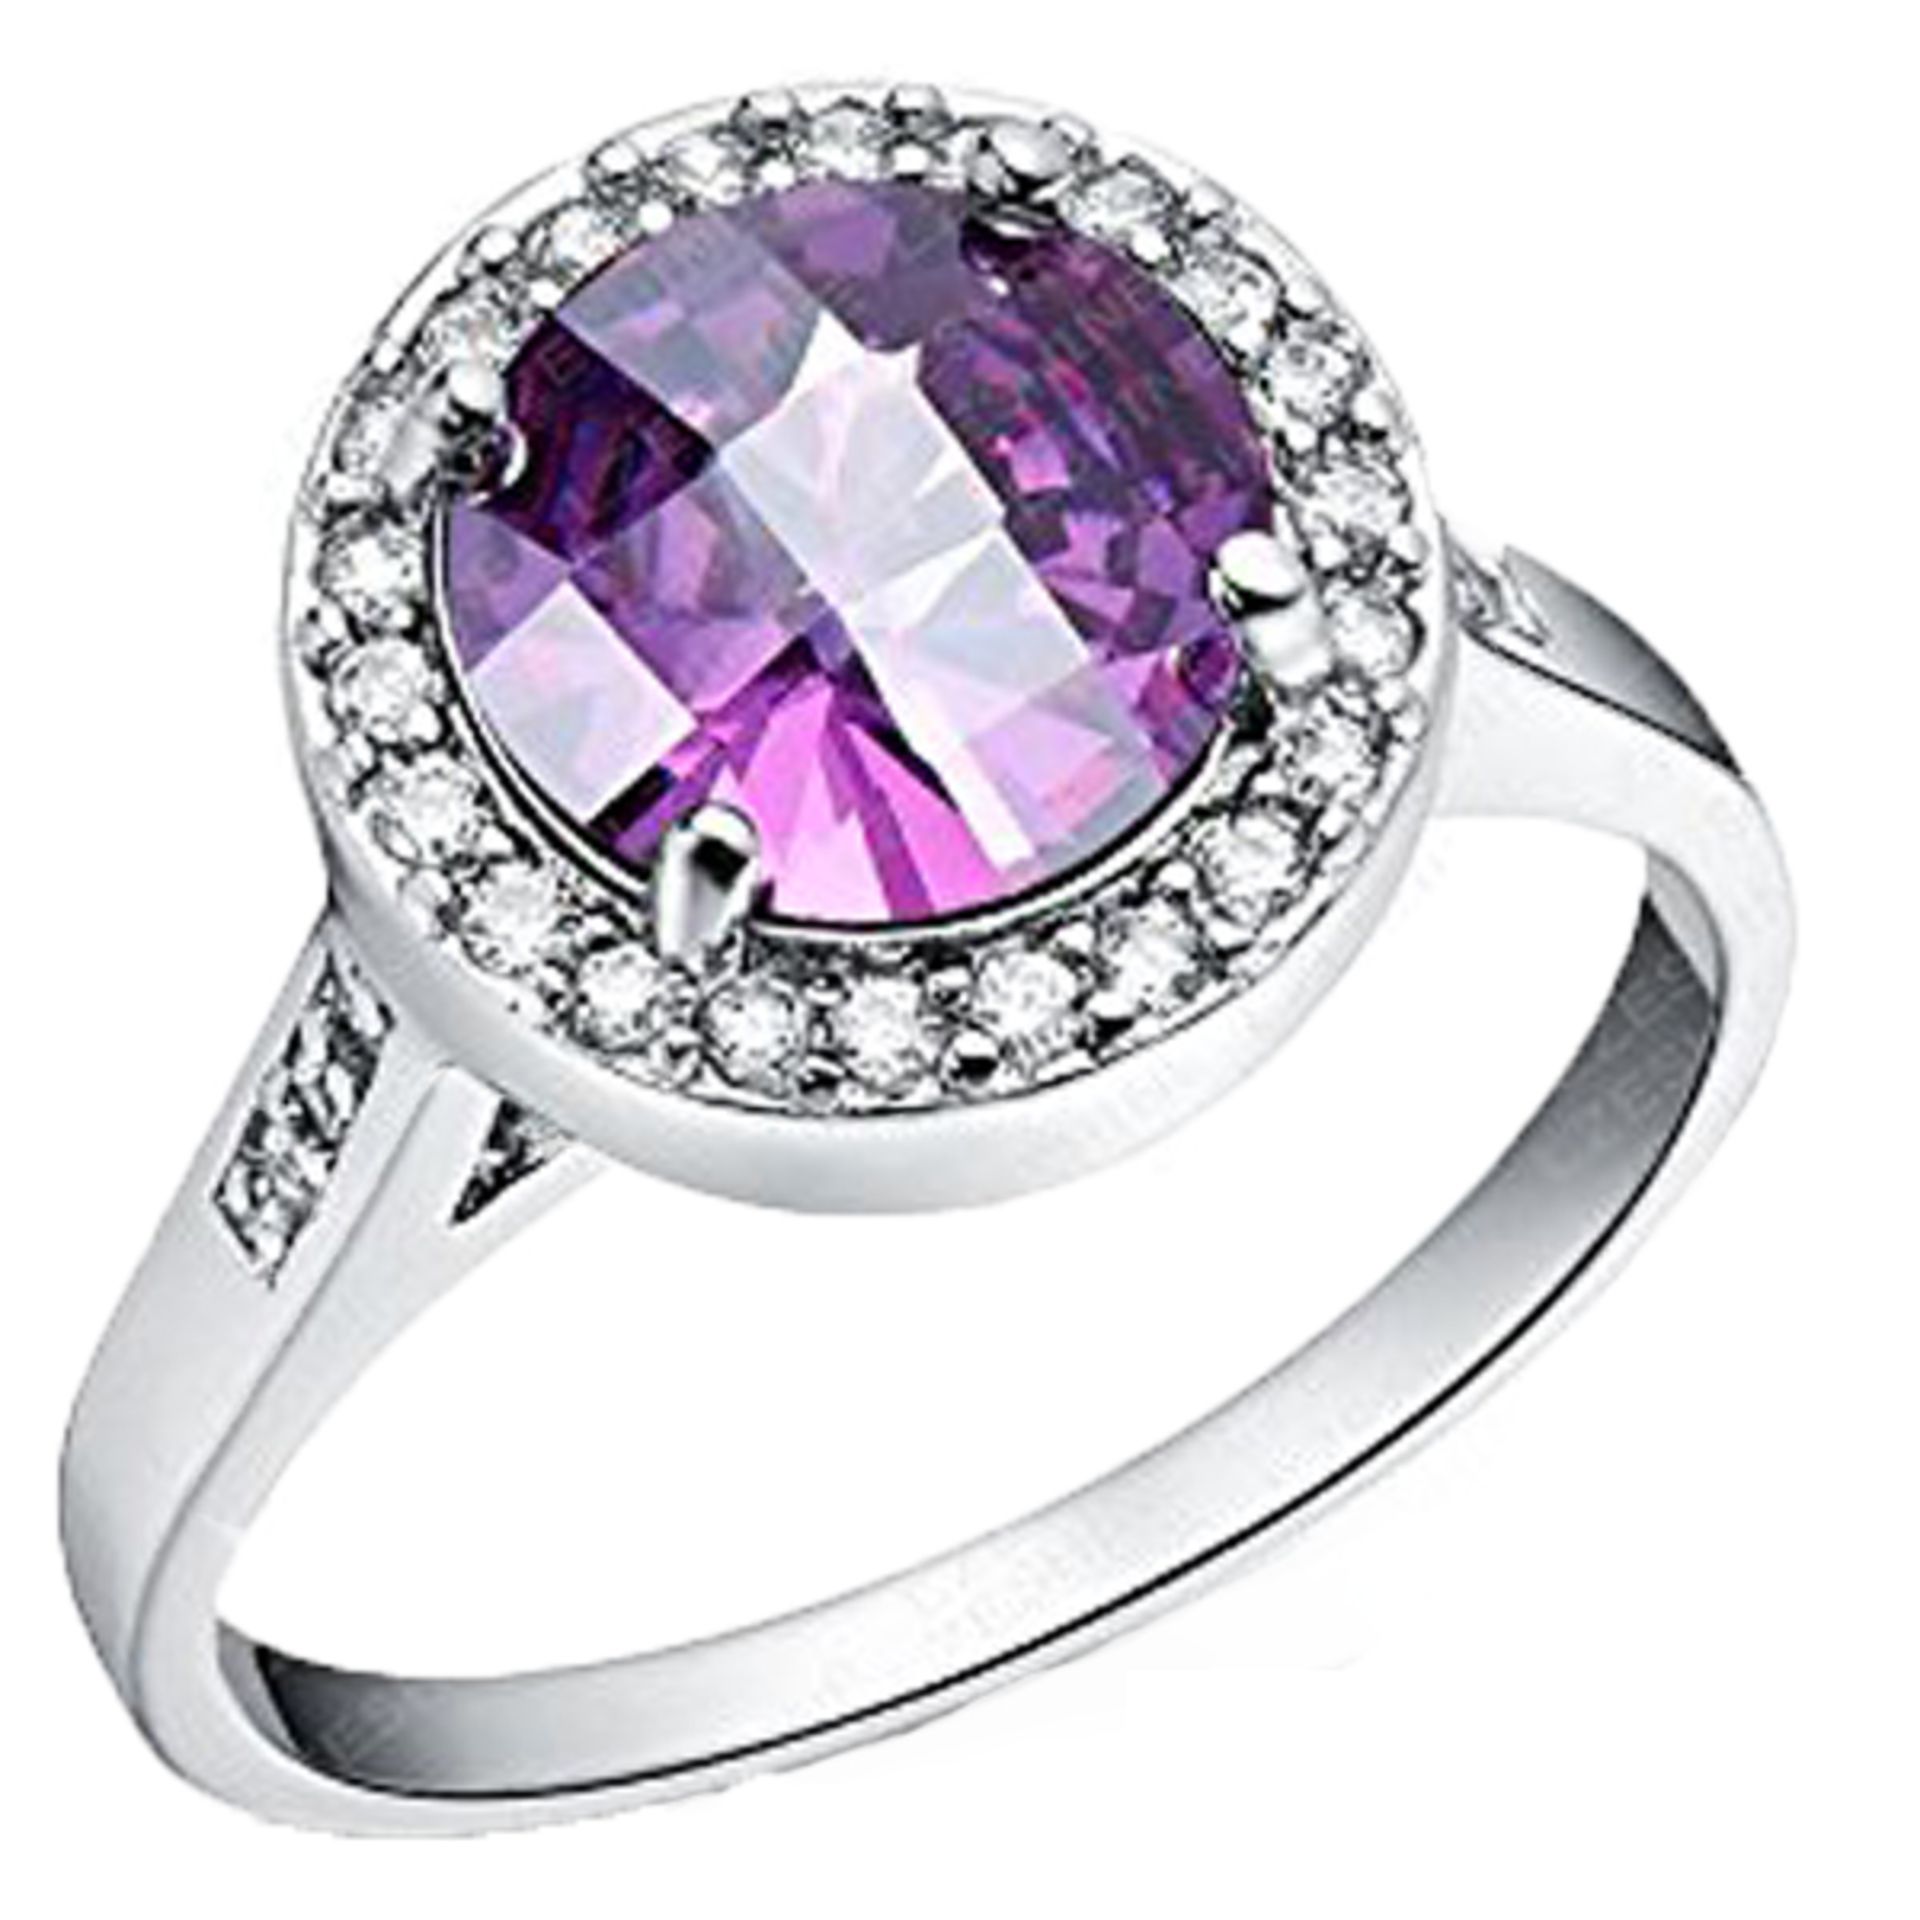 V Brand New Platinum Plated White and Purple Stone Ring X 2 YOUR BID PRICE TO BE MULTIPLIED BY TWO